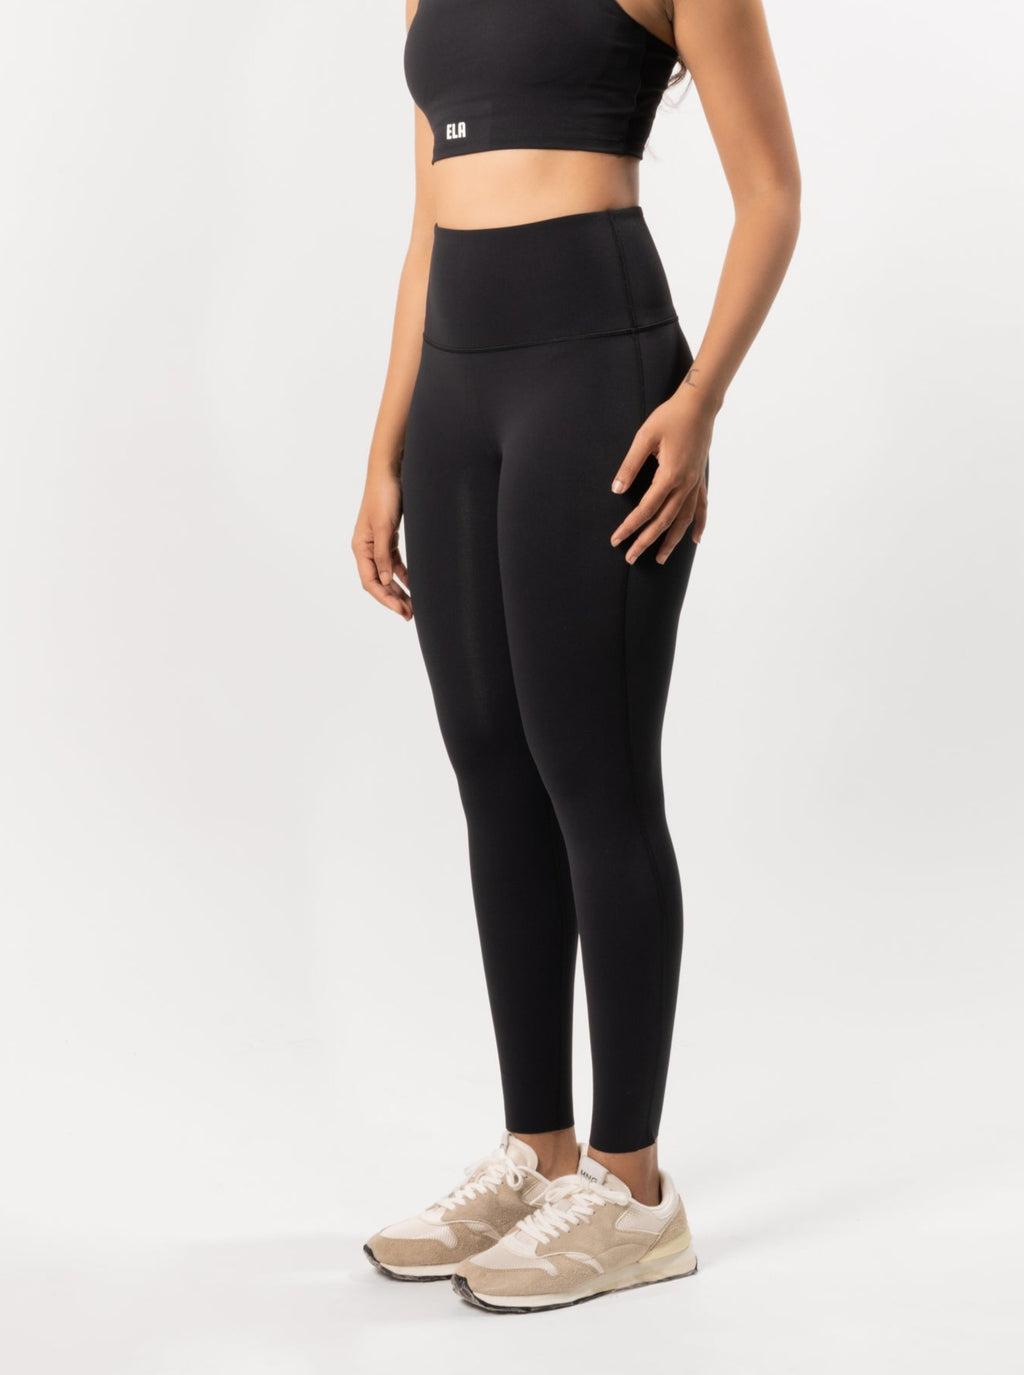 Empowered Leggings With Pockets Black, 44% OFF